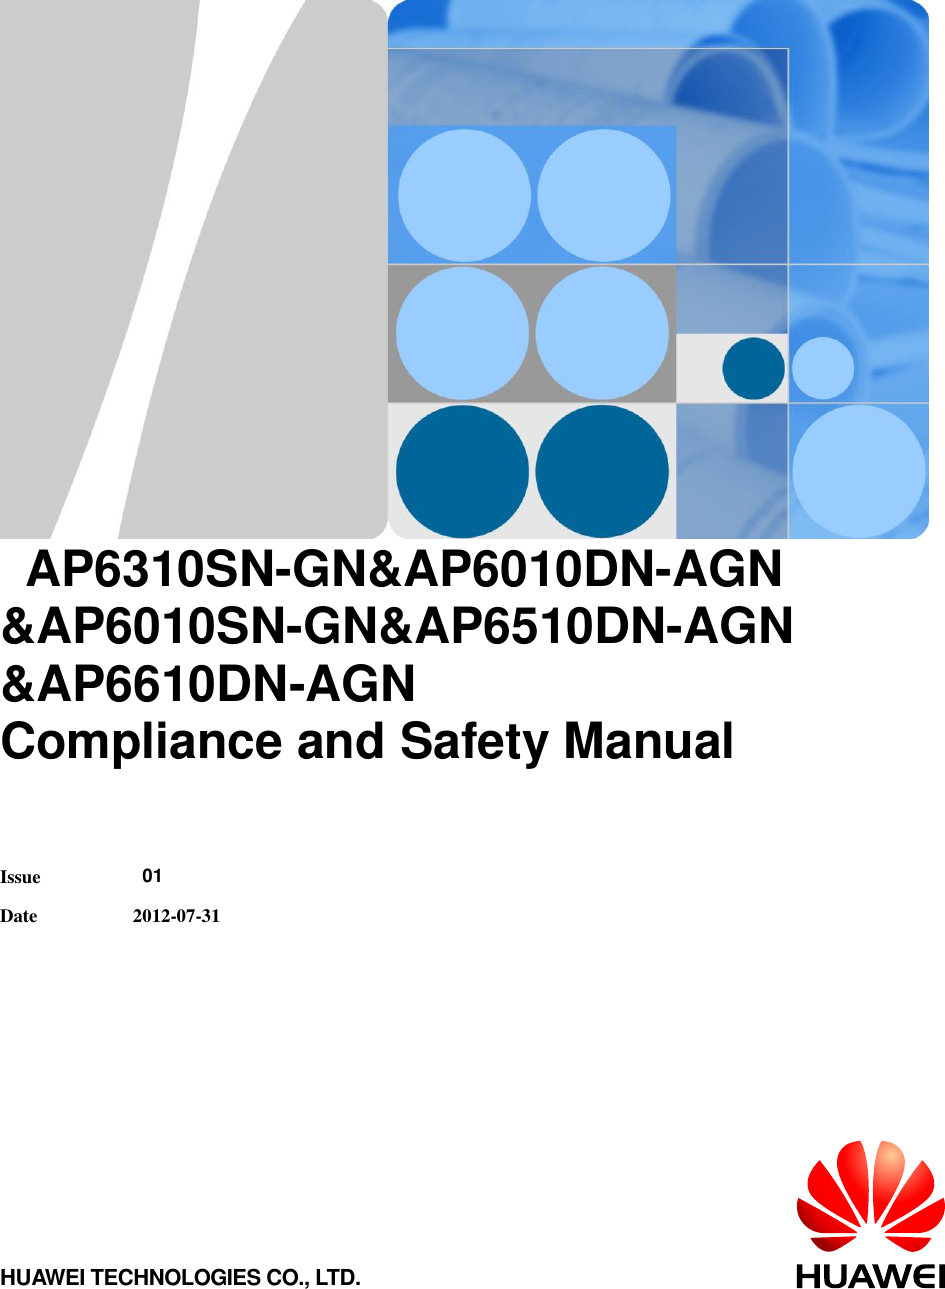           AP6310SN-GN&amp;AP6010DN-AGN &amp;AP6010SN-GN&amp;AP6510DN-AGN &amp;AP6610DN-AGN   Compliance and Safety Manual   Issue  01 Date 2012-07-31 HUAWEI TECHNOLOGIES CO., LTD. 